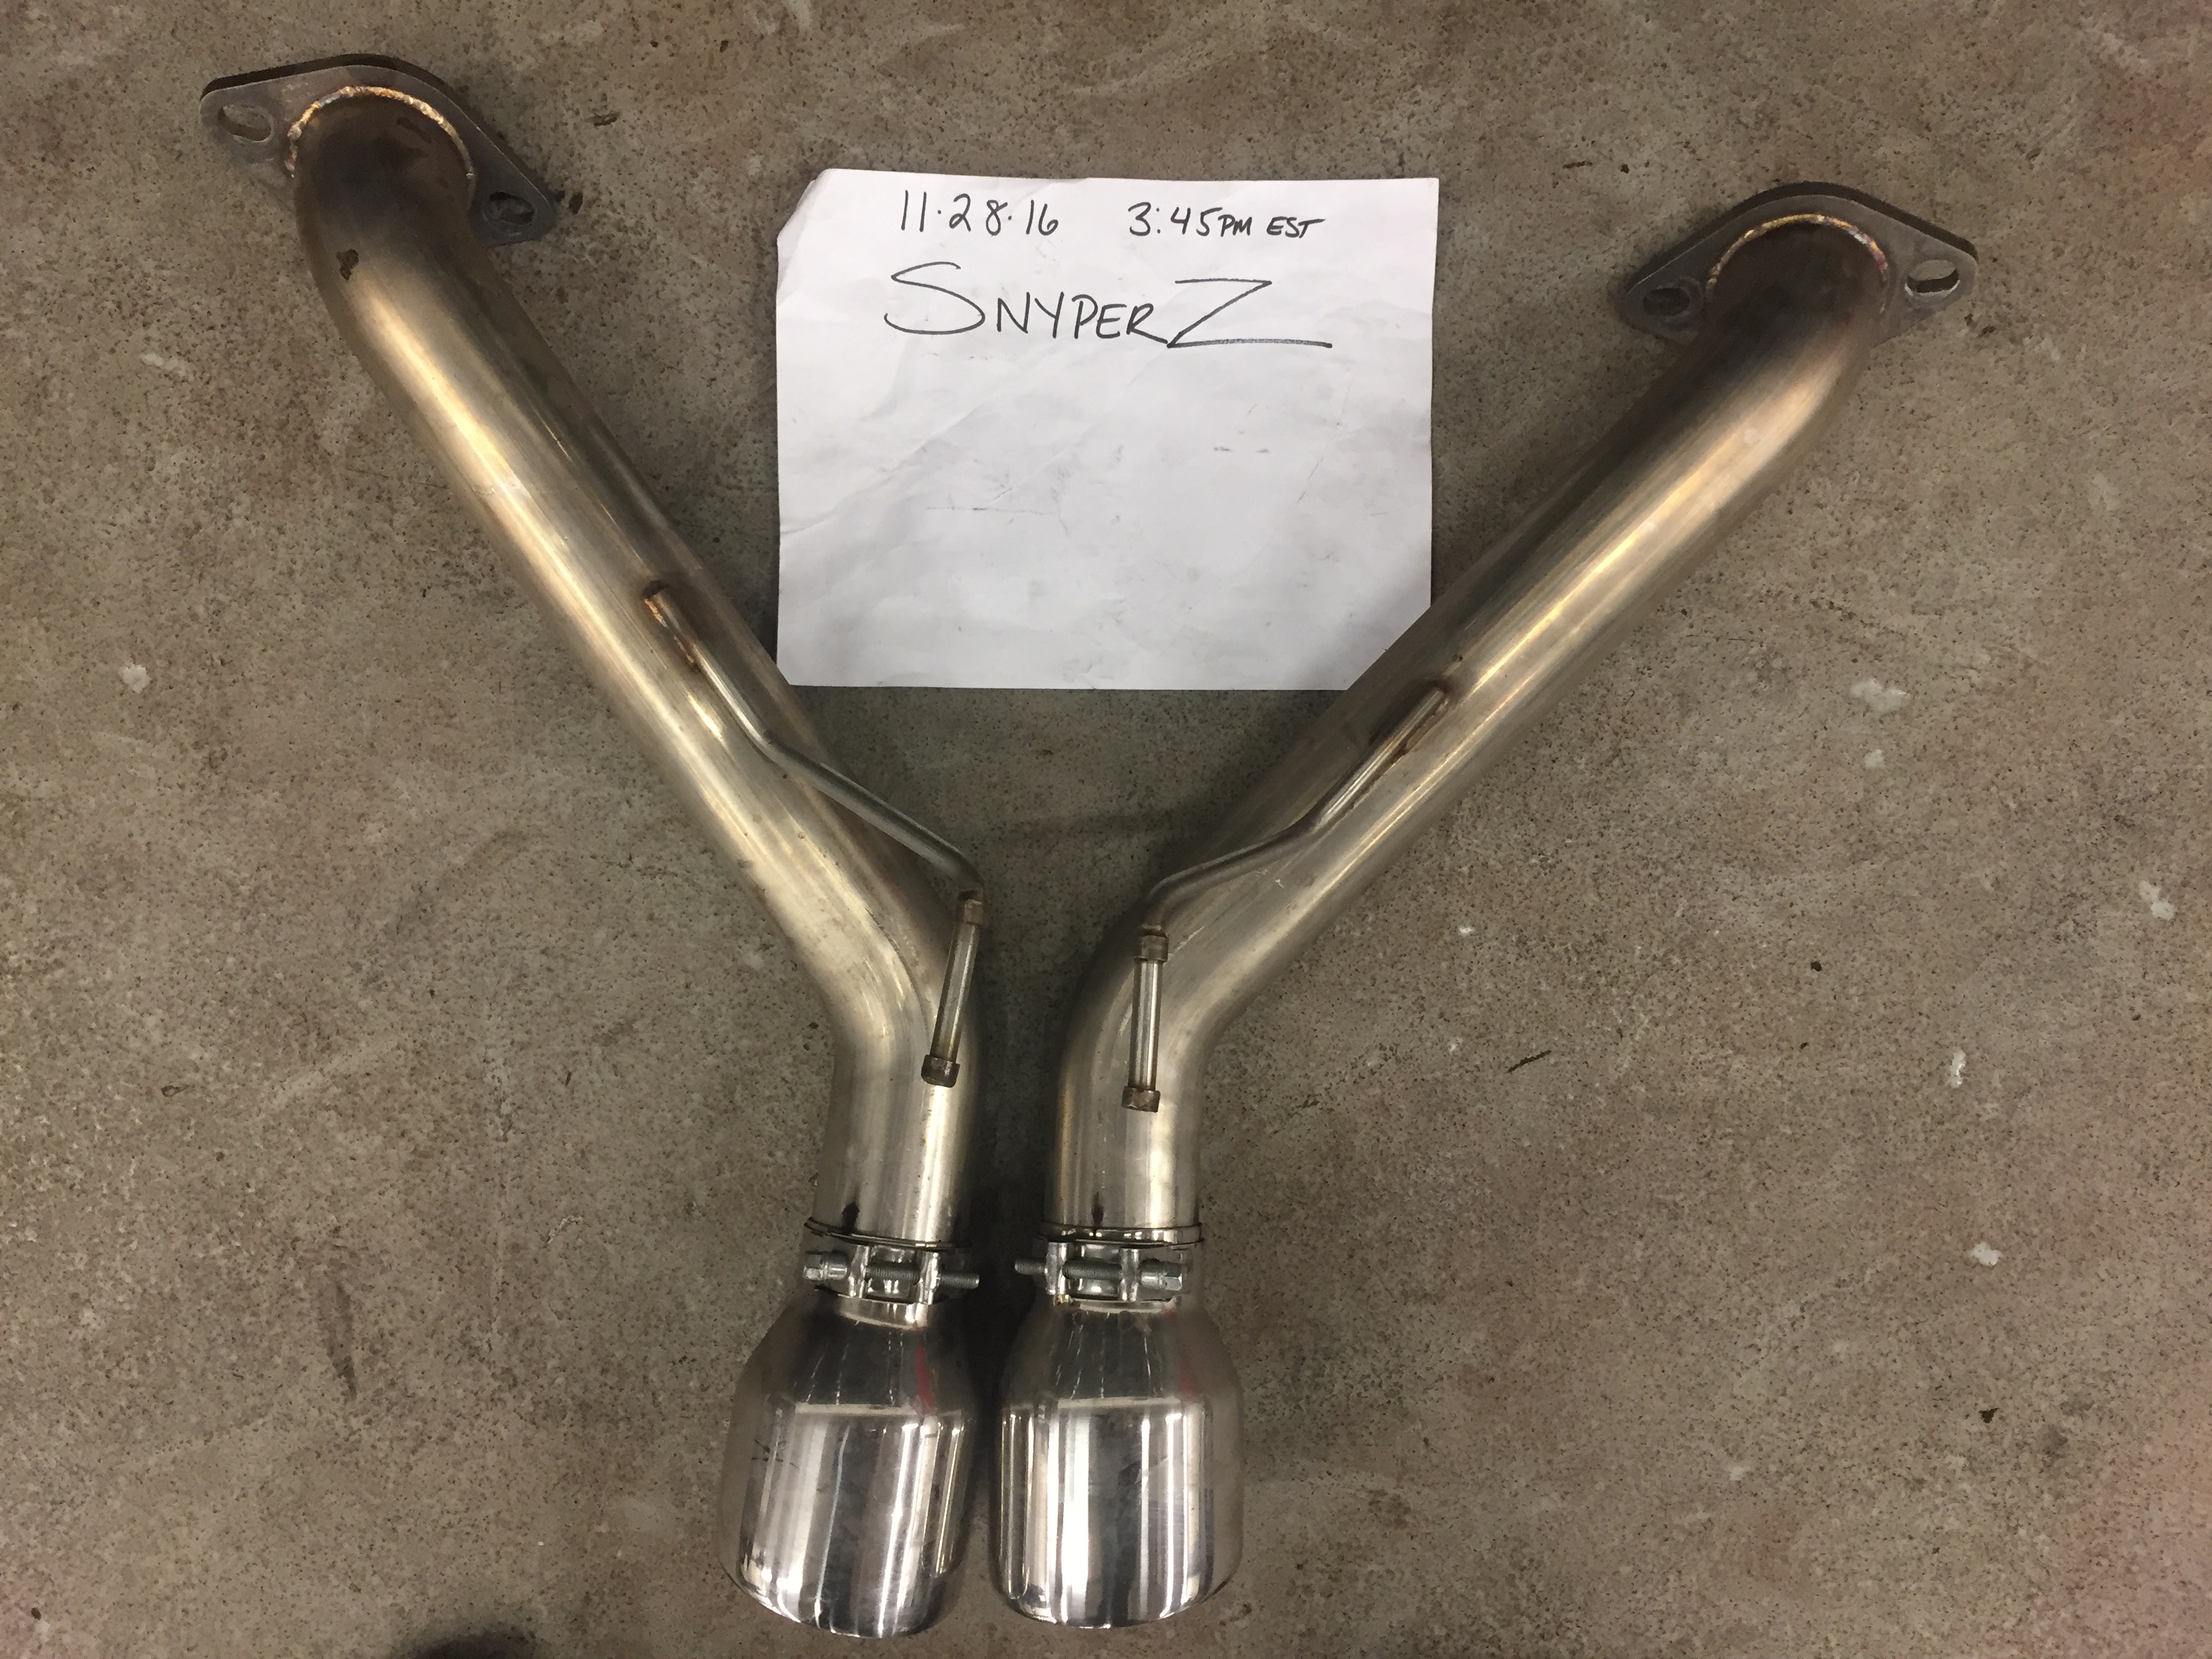 [FS]: AAM 370z axle back straight pipes. $300 shipped - MY350Z.COM